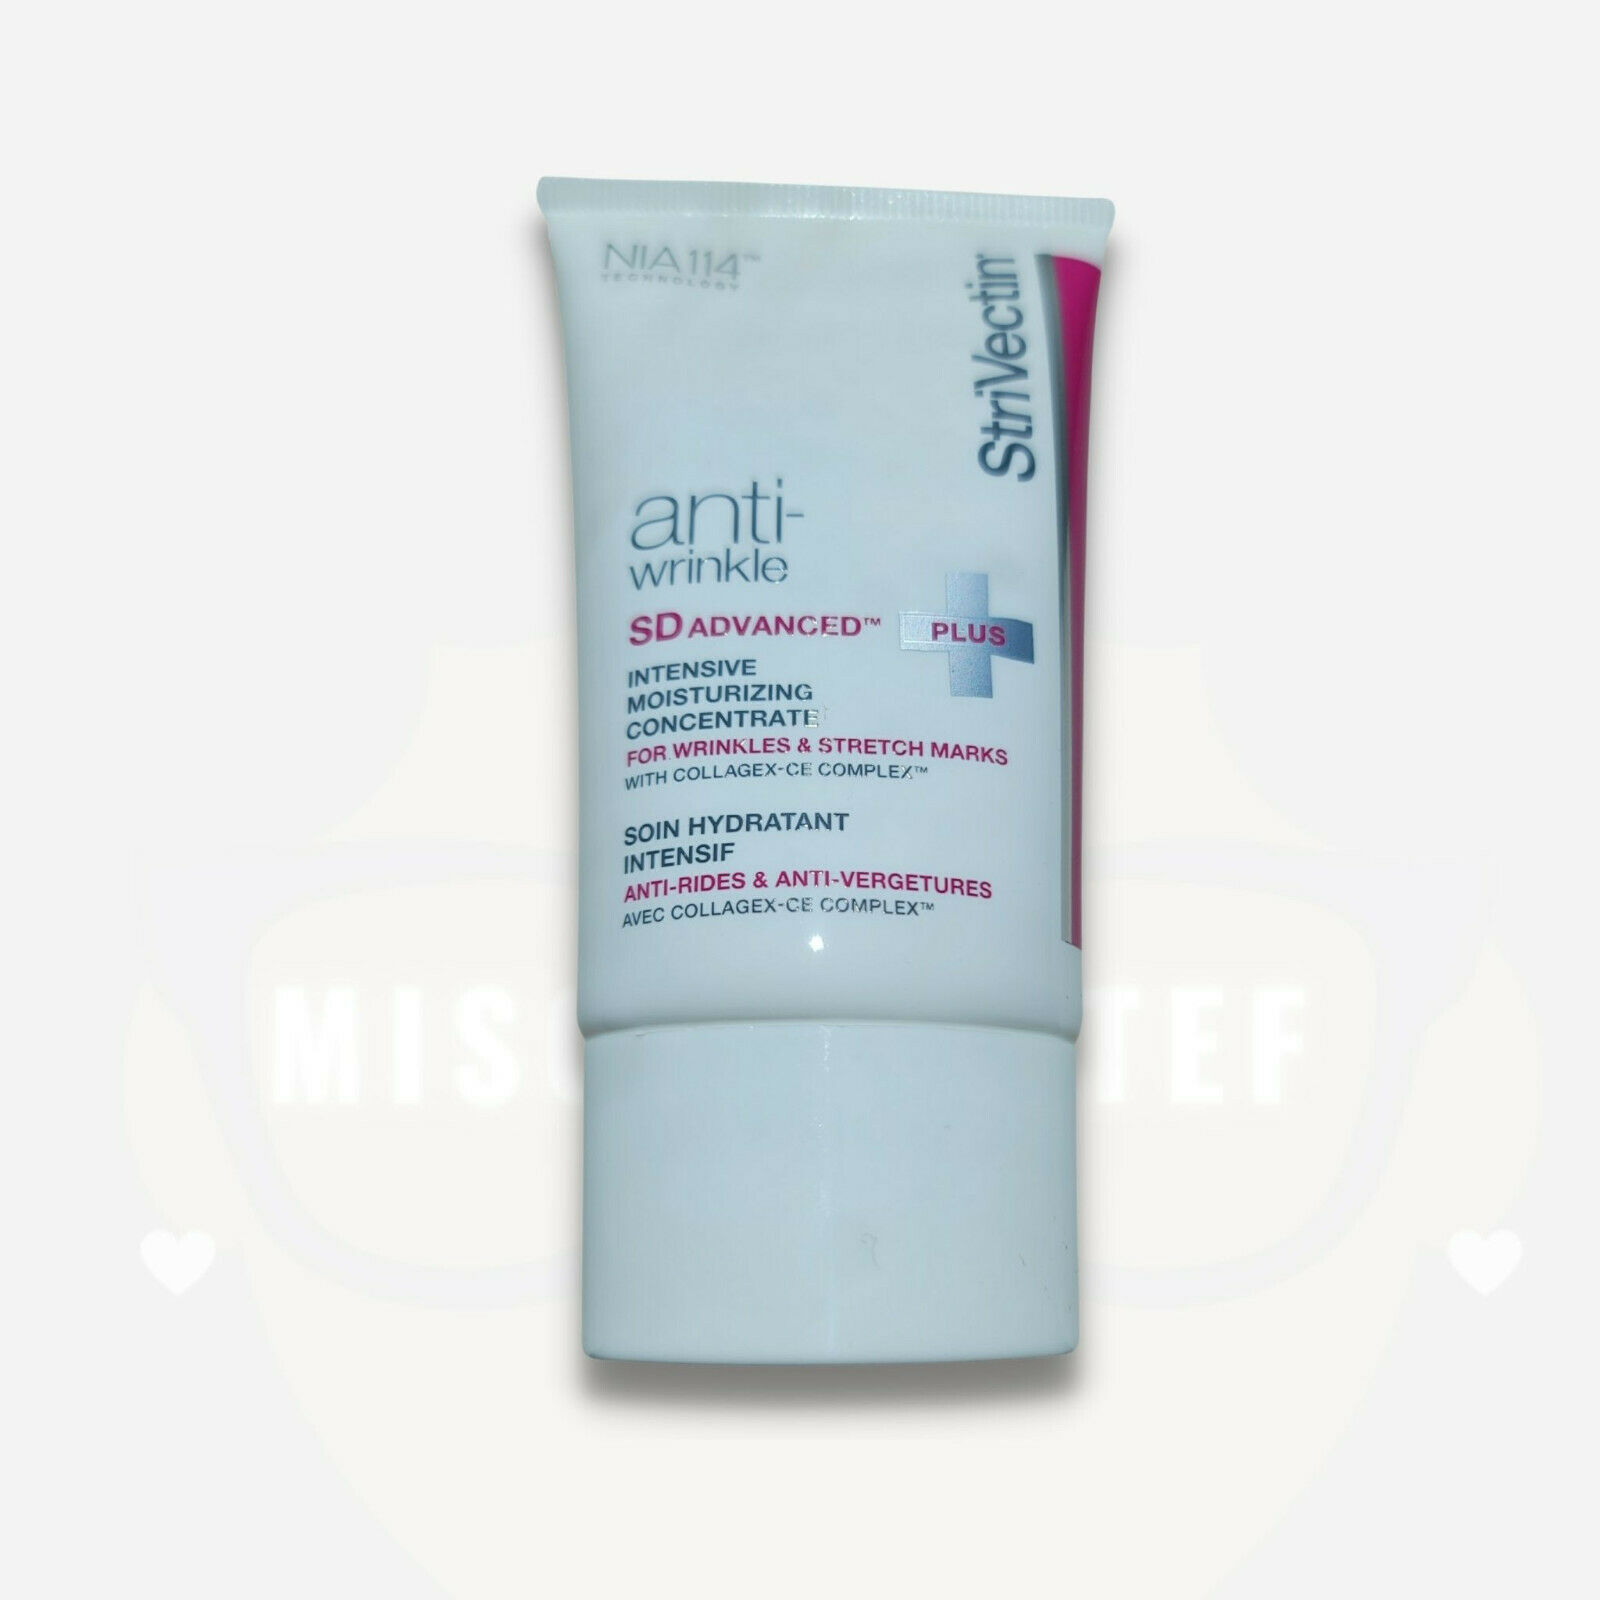 StriVectin SD Advanced + Anti-Wrinkle Intensive Moisturizing Concentrate- Sealed - $49.29